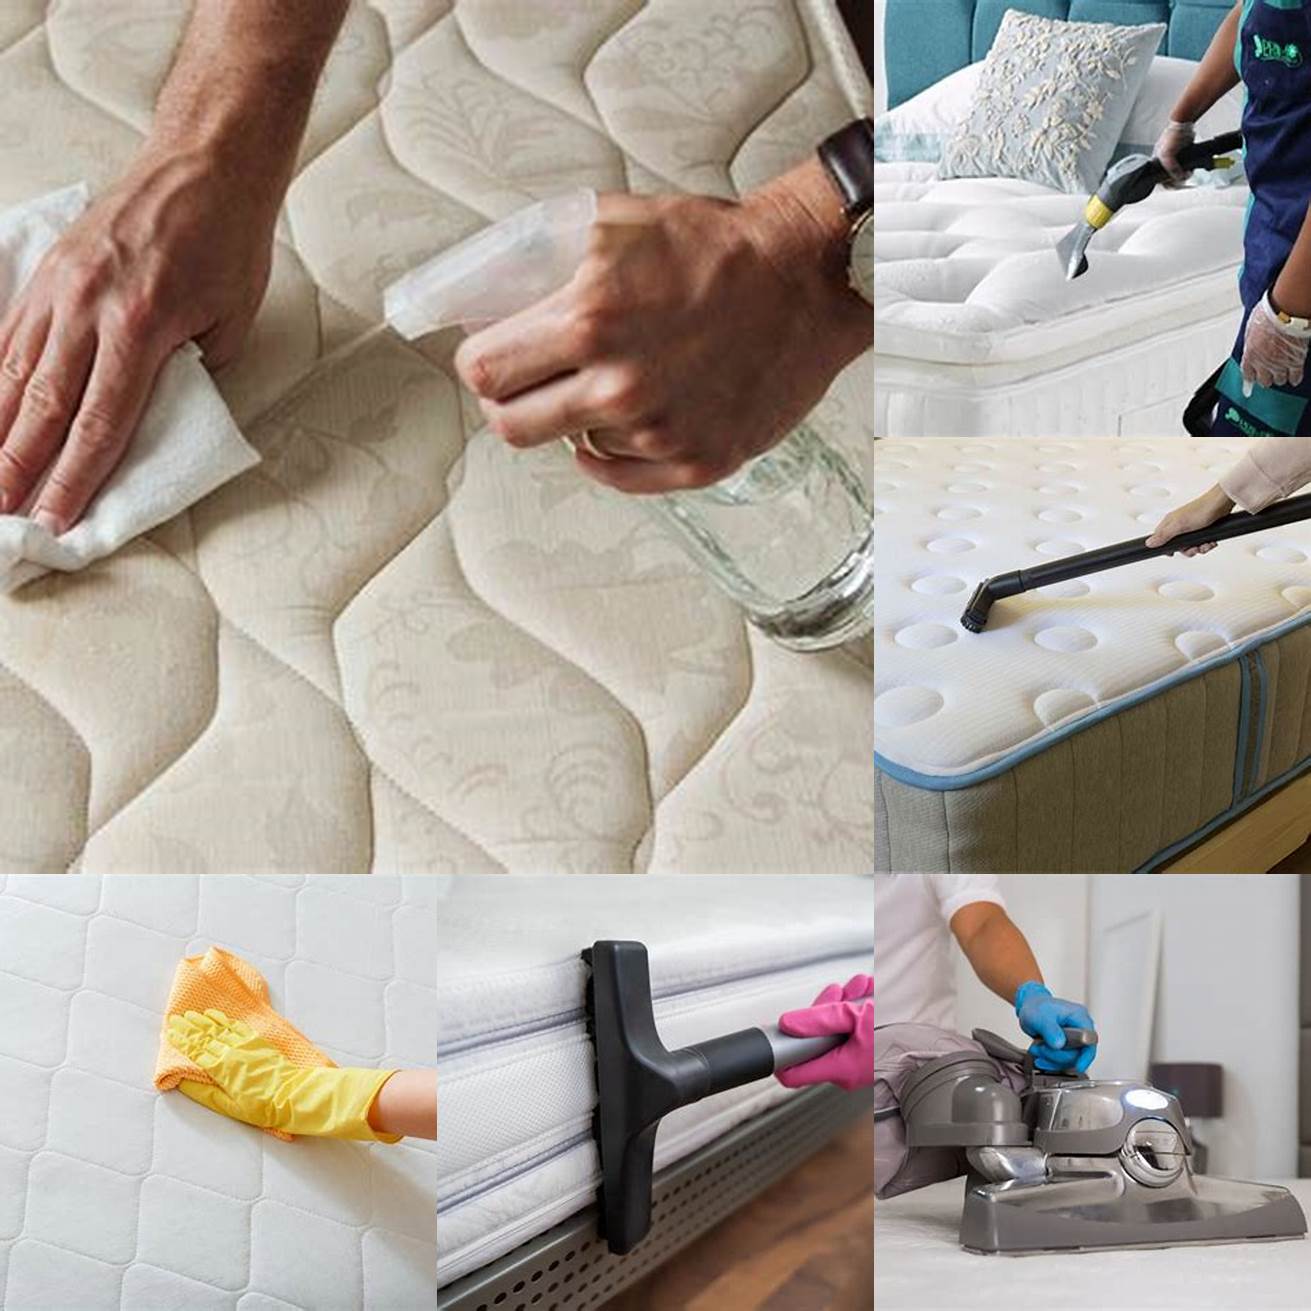 4 Clean your bed frame and mattress regularly to prevent dust and dirt buildup